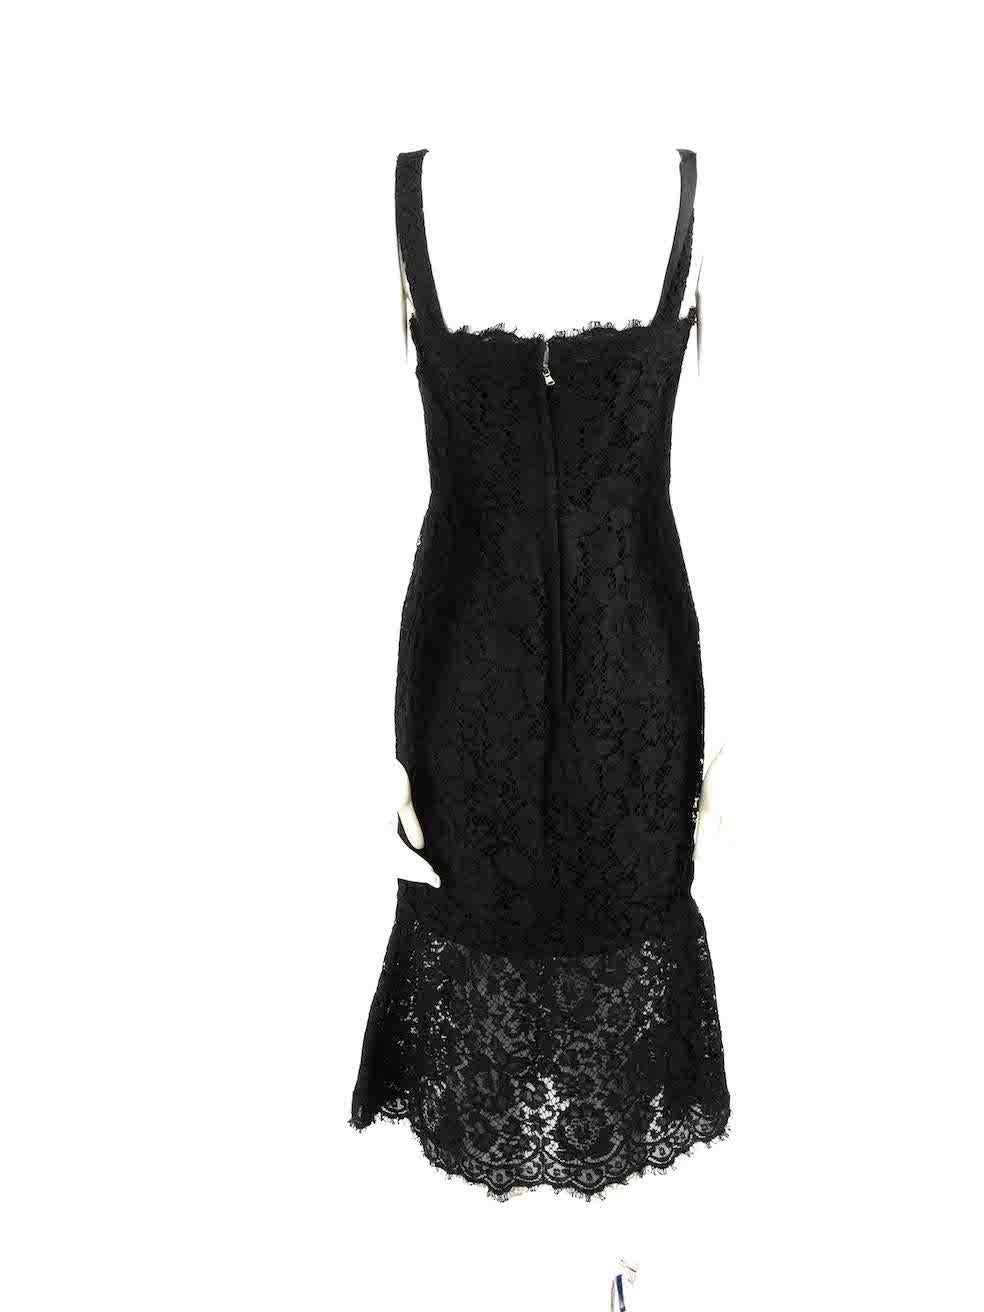 Dolce & Gabbana Black Floral Lace Midi Dress Size XS In Good Condition For Sale In London, GB